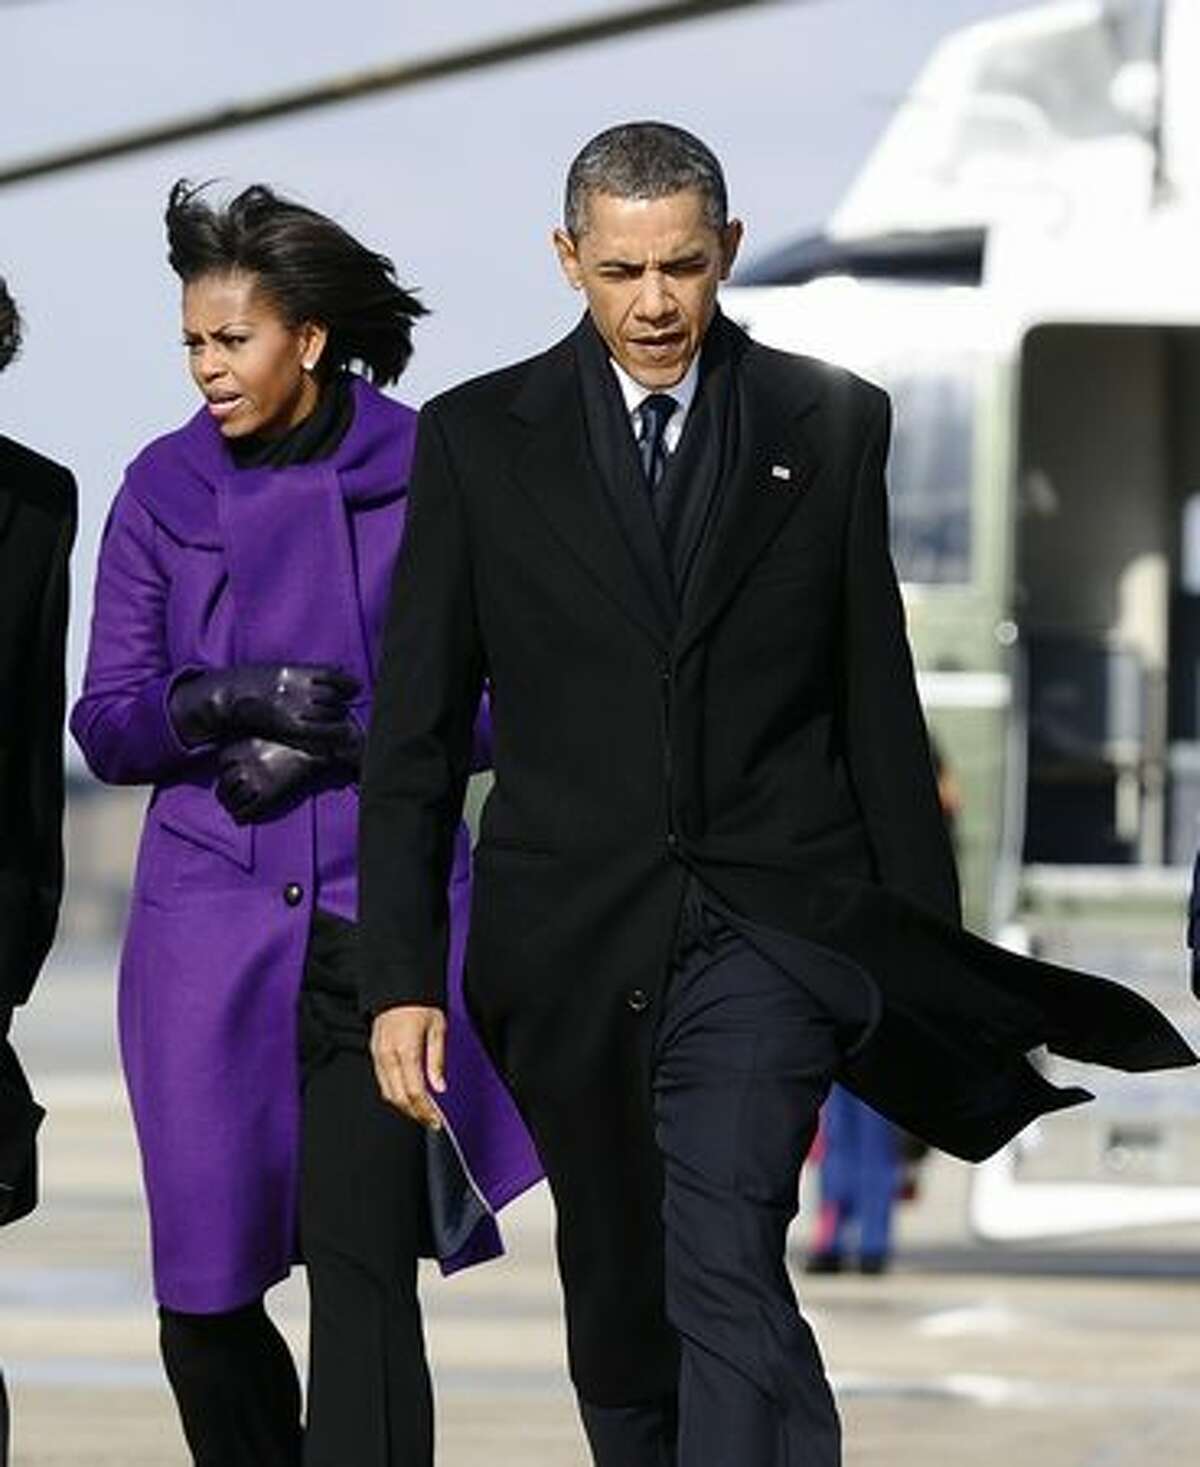 US President Barack Obama and First Lady Michelle Obama arrive to board Air Force One at the Andrews Air Force Base in Maryland on Wednesday to leave for Tucson, Arizona, to attend the memorial event “Together We Thrive: Tucson and America” to support and remember victims of the mass shooting in Tucson. The First Couple will attend tribute service for the six people who were killed and the 14 wounded in the assassination attempt on congresswoman Gabrielle Giffords, who is fighting for her life in a hospital.